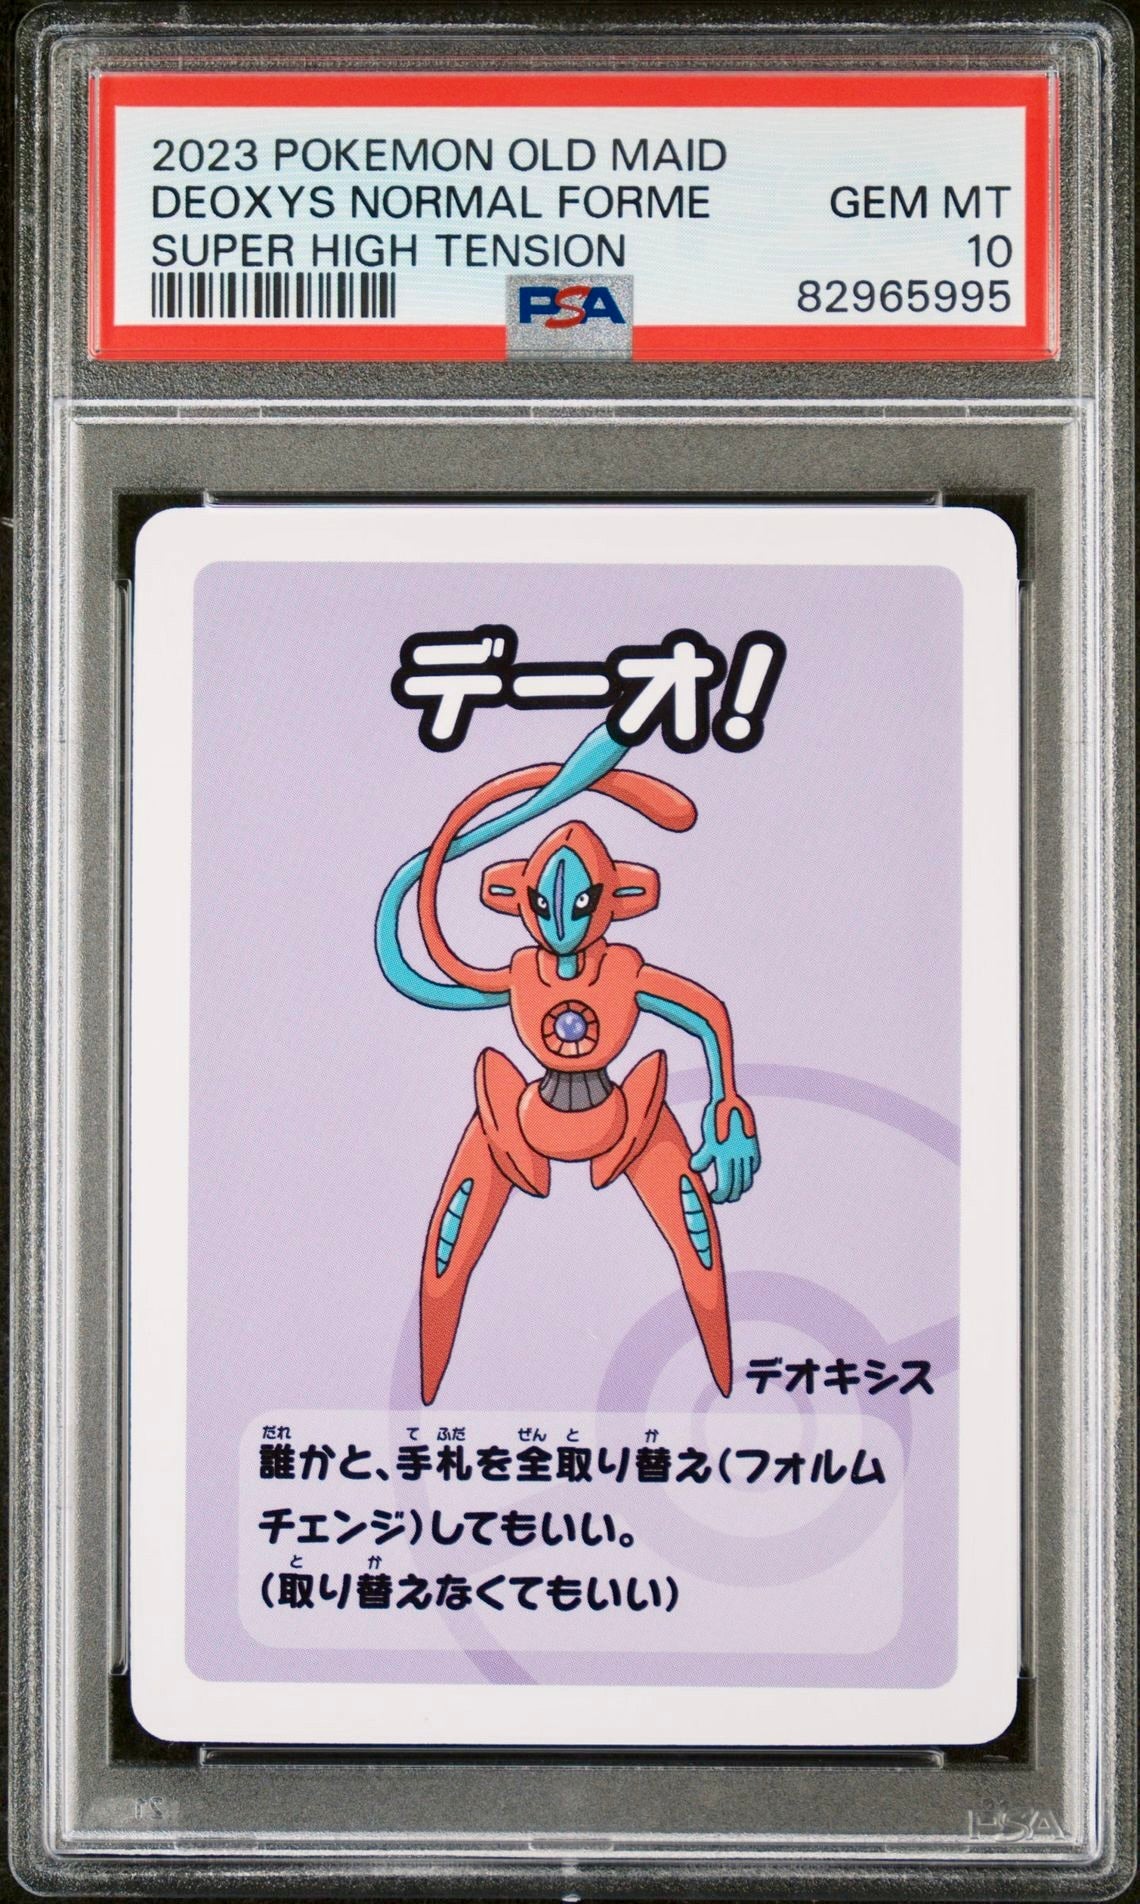 PSA 10 - Deoxys Old Maid Super High Tension - Pokemon